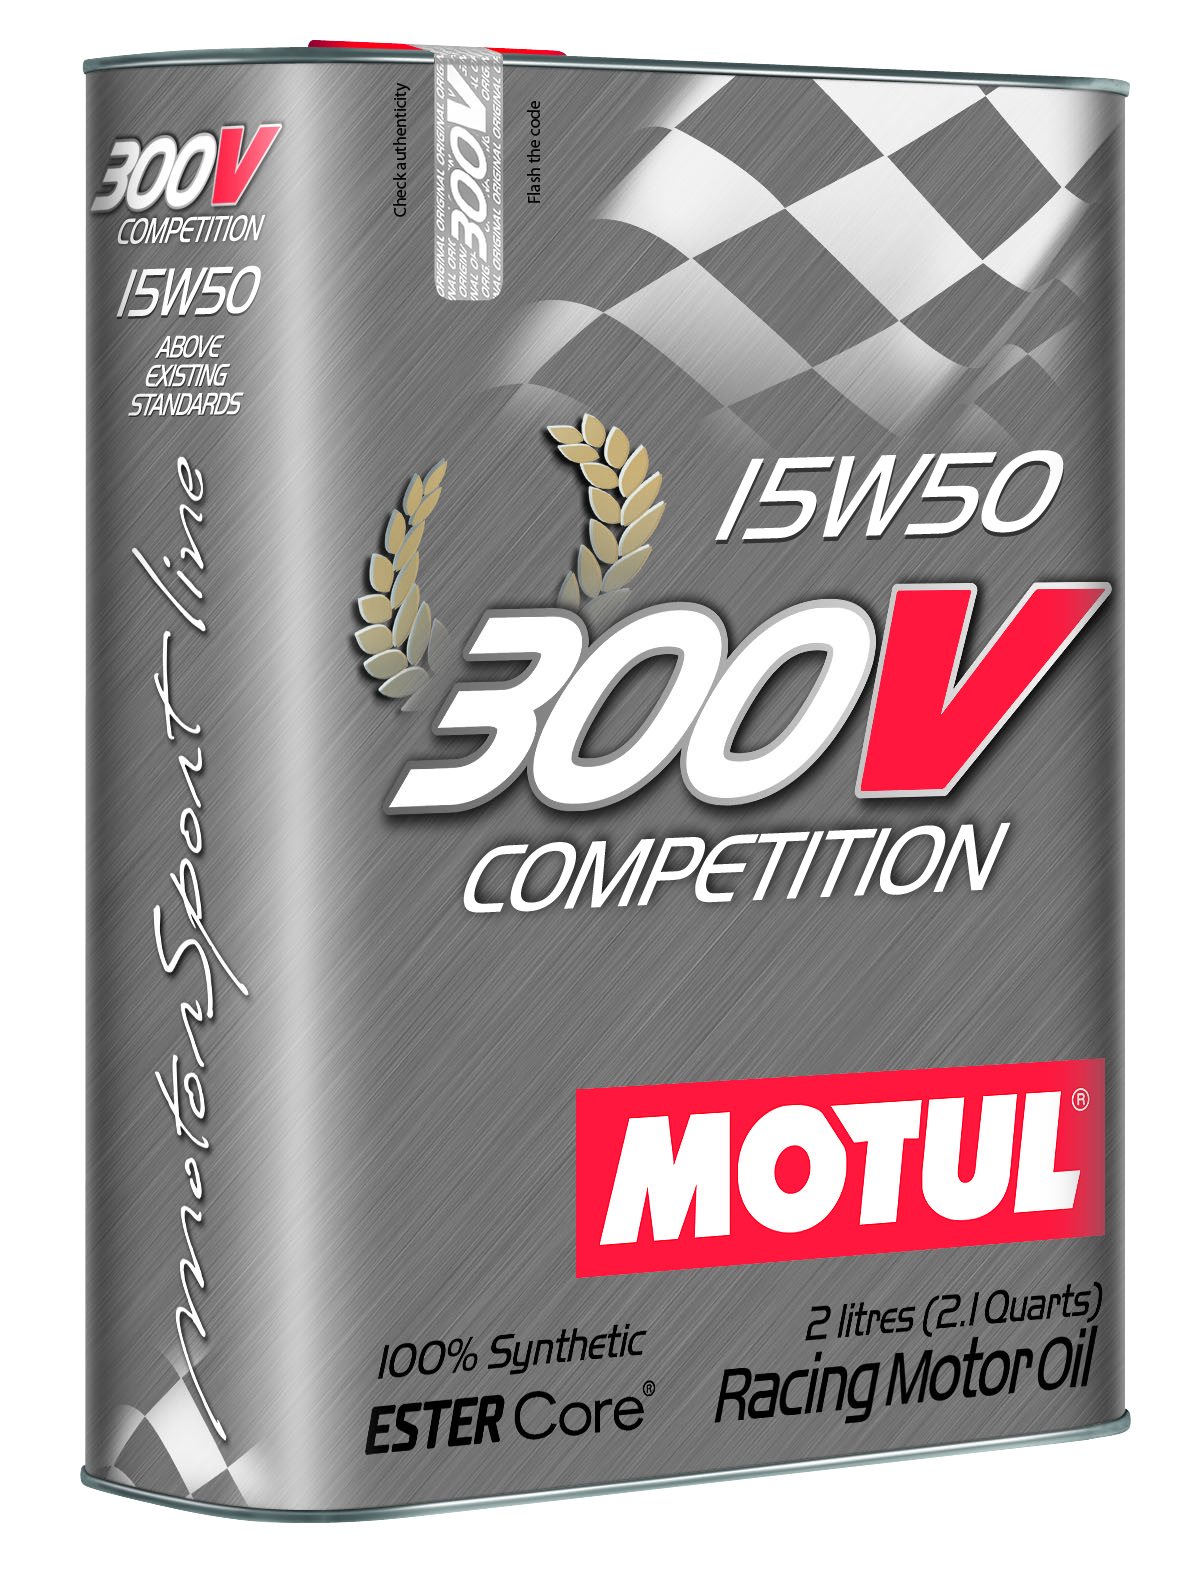 MOTUL 300V COMPETITION 15W50 - 2L - Racing Engine Oil